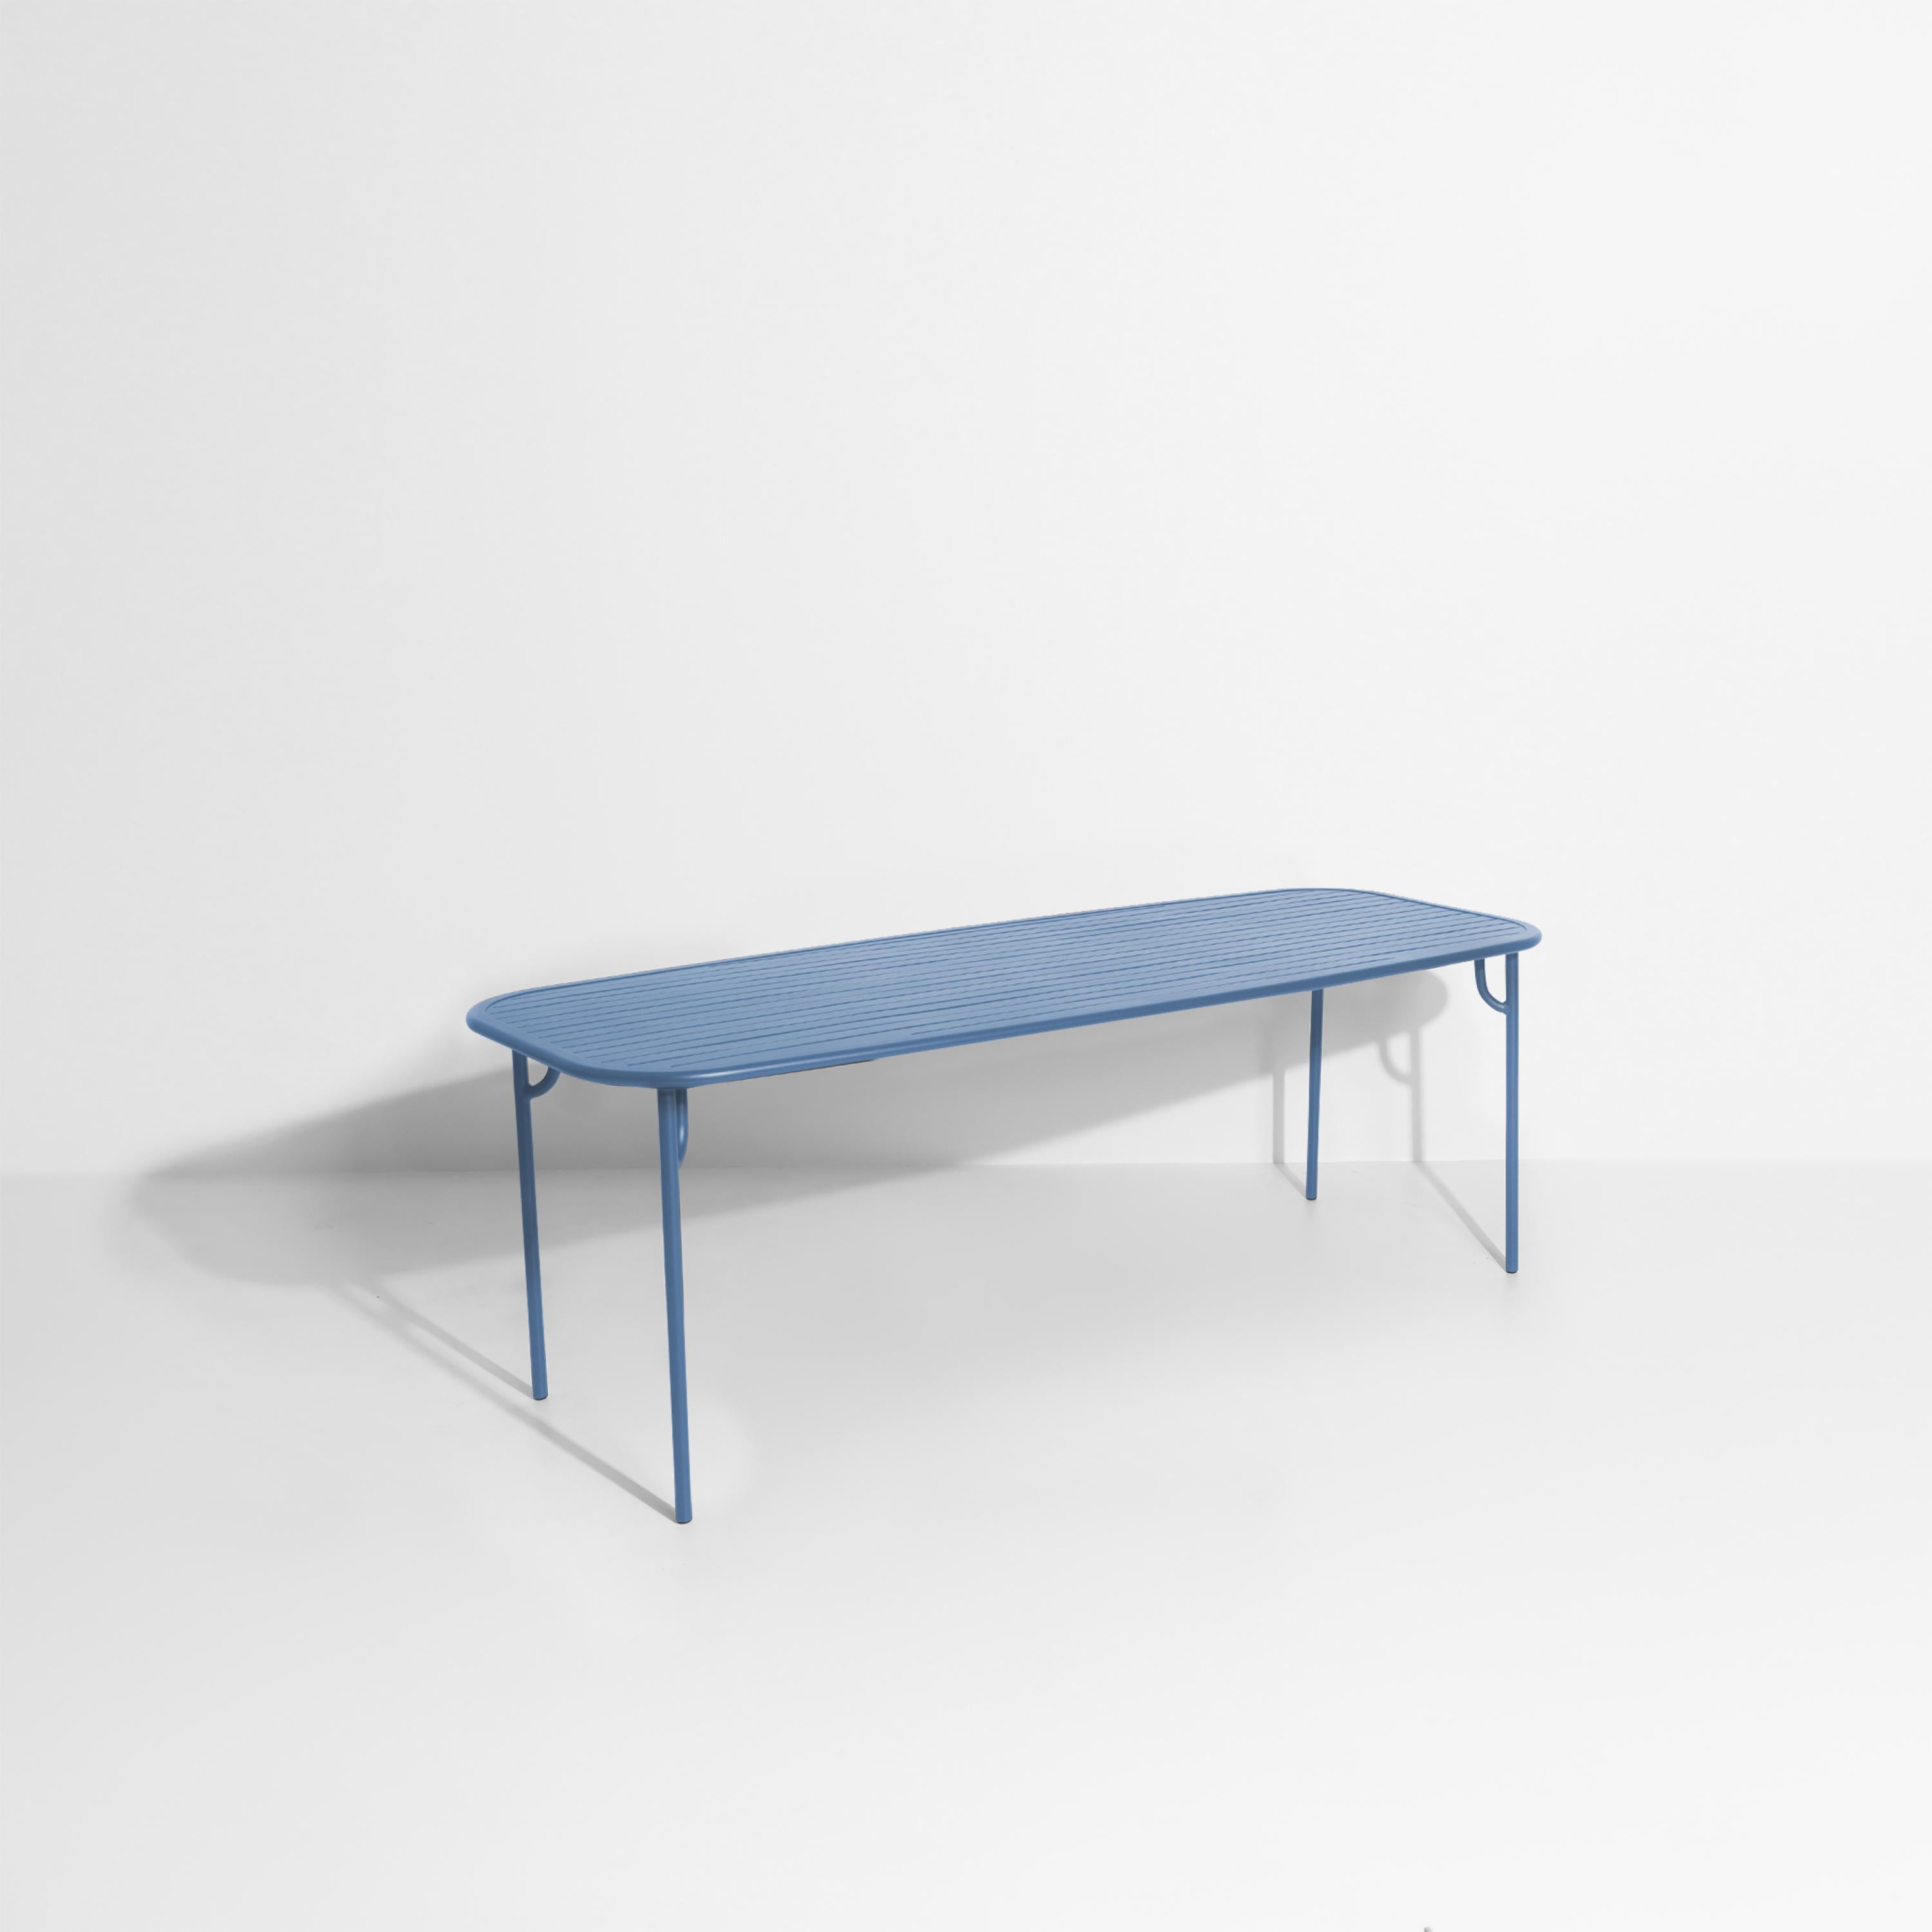 Petite Friture Week-End Large Rectangular Dining Table in Azur Blue Aluminium with Slats by Studio BrichetZiegler, 2017

The week-end collection is a full range of outdoor furniture, in aluminium grained epoxy paint, matt finish, that includes 18